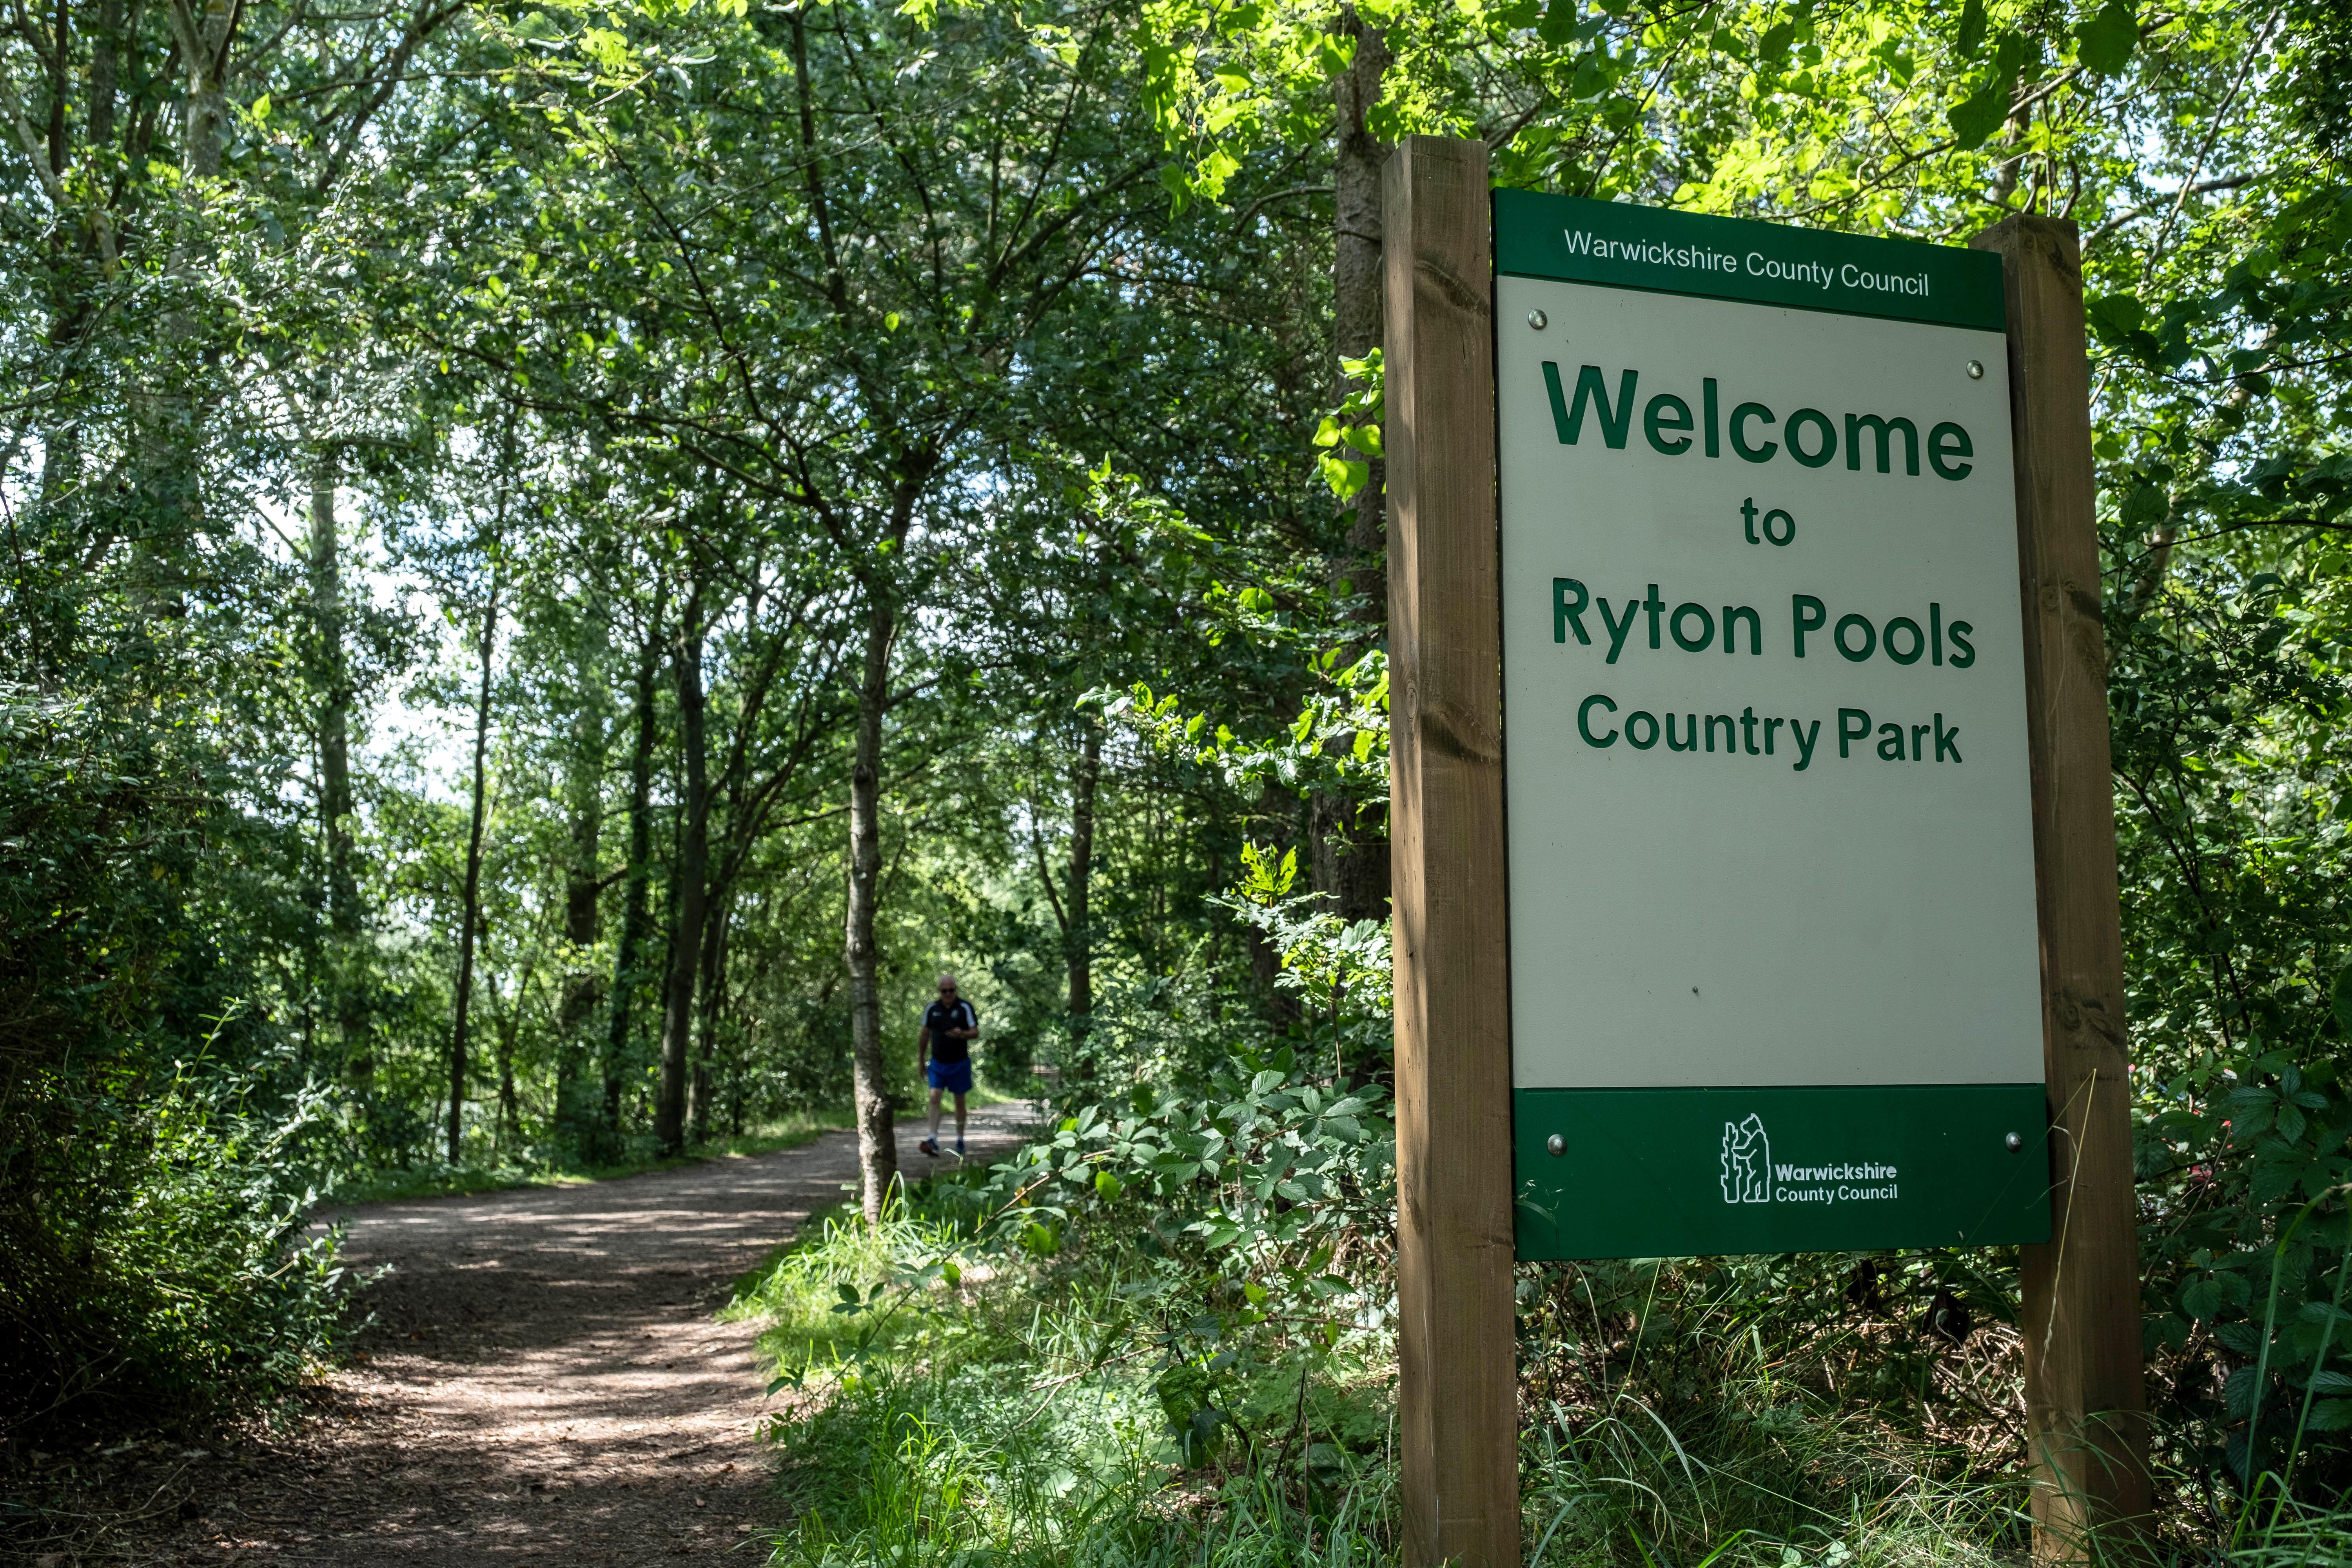 A photograph of a sign reading "welcome to Ryton Pools Country Park". The sign is surrounded by woodland, with a path visible in the foreground.